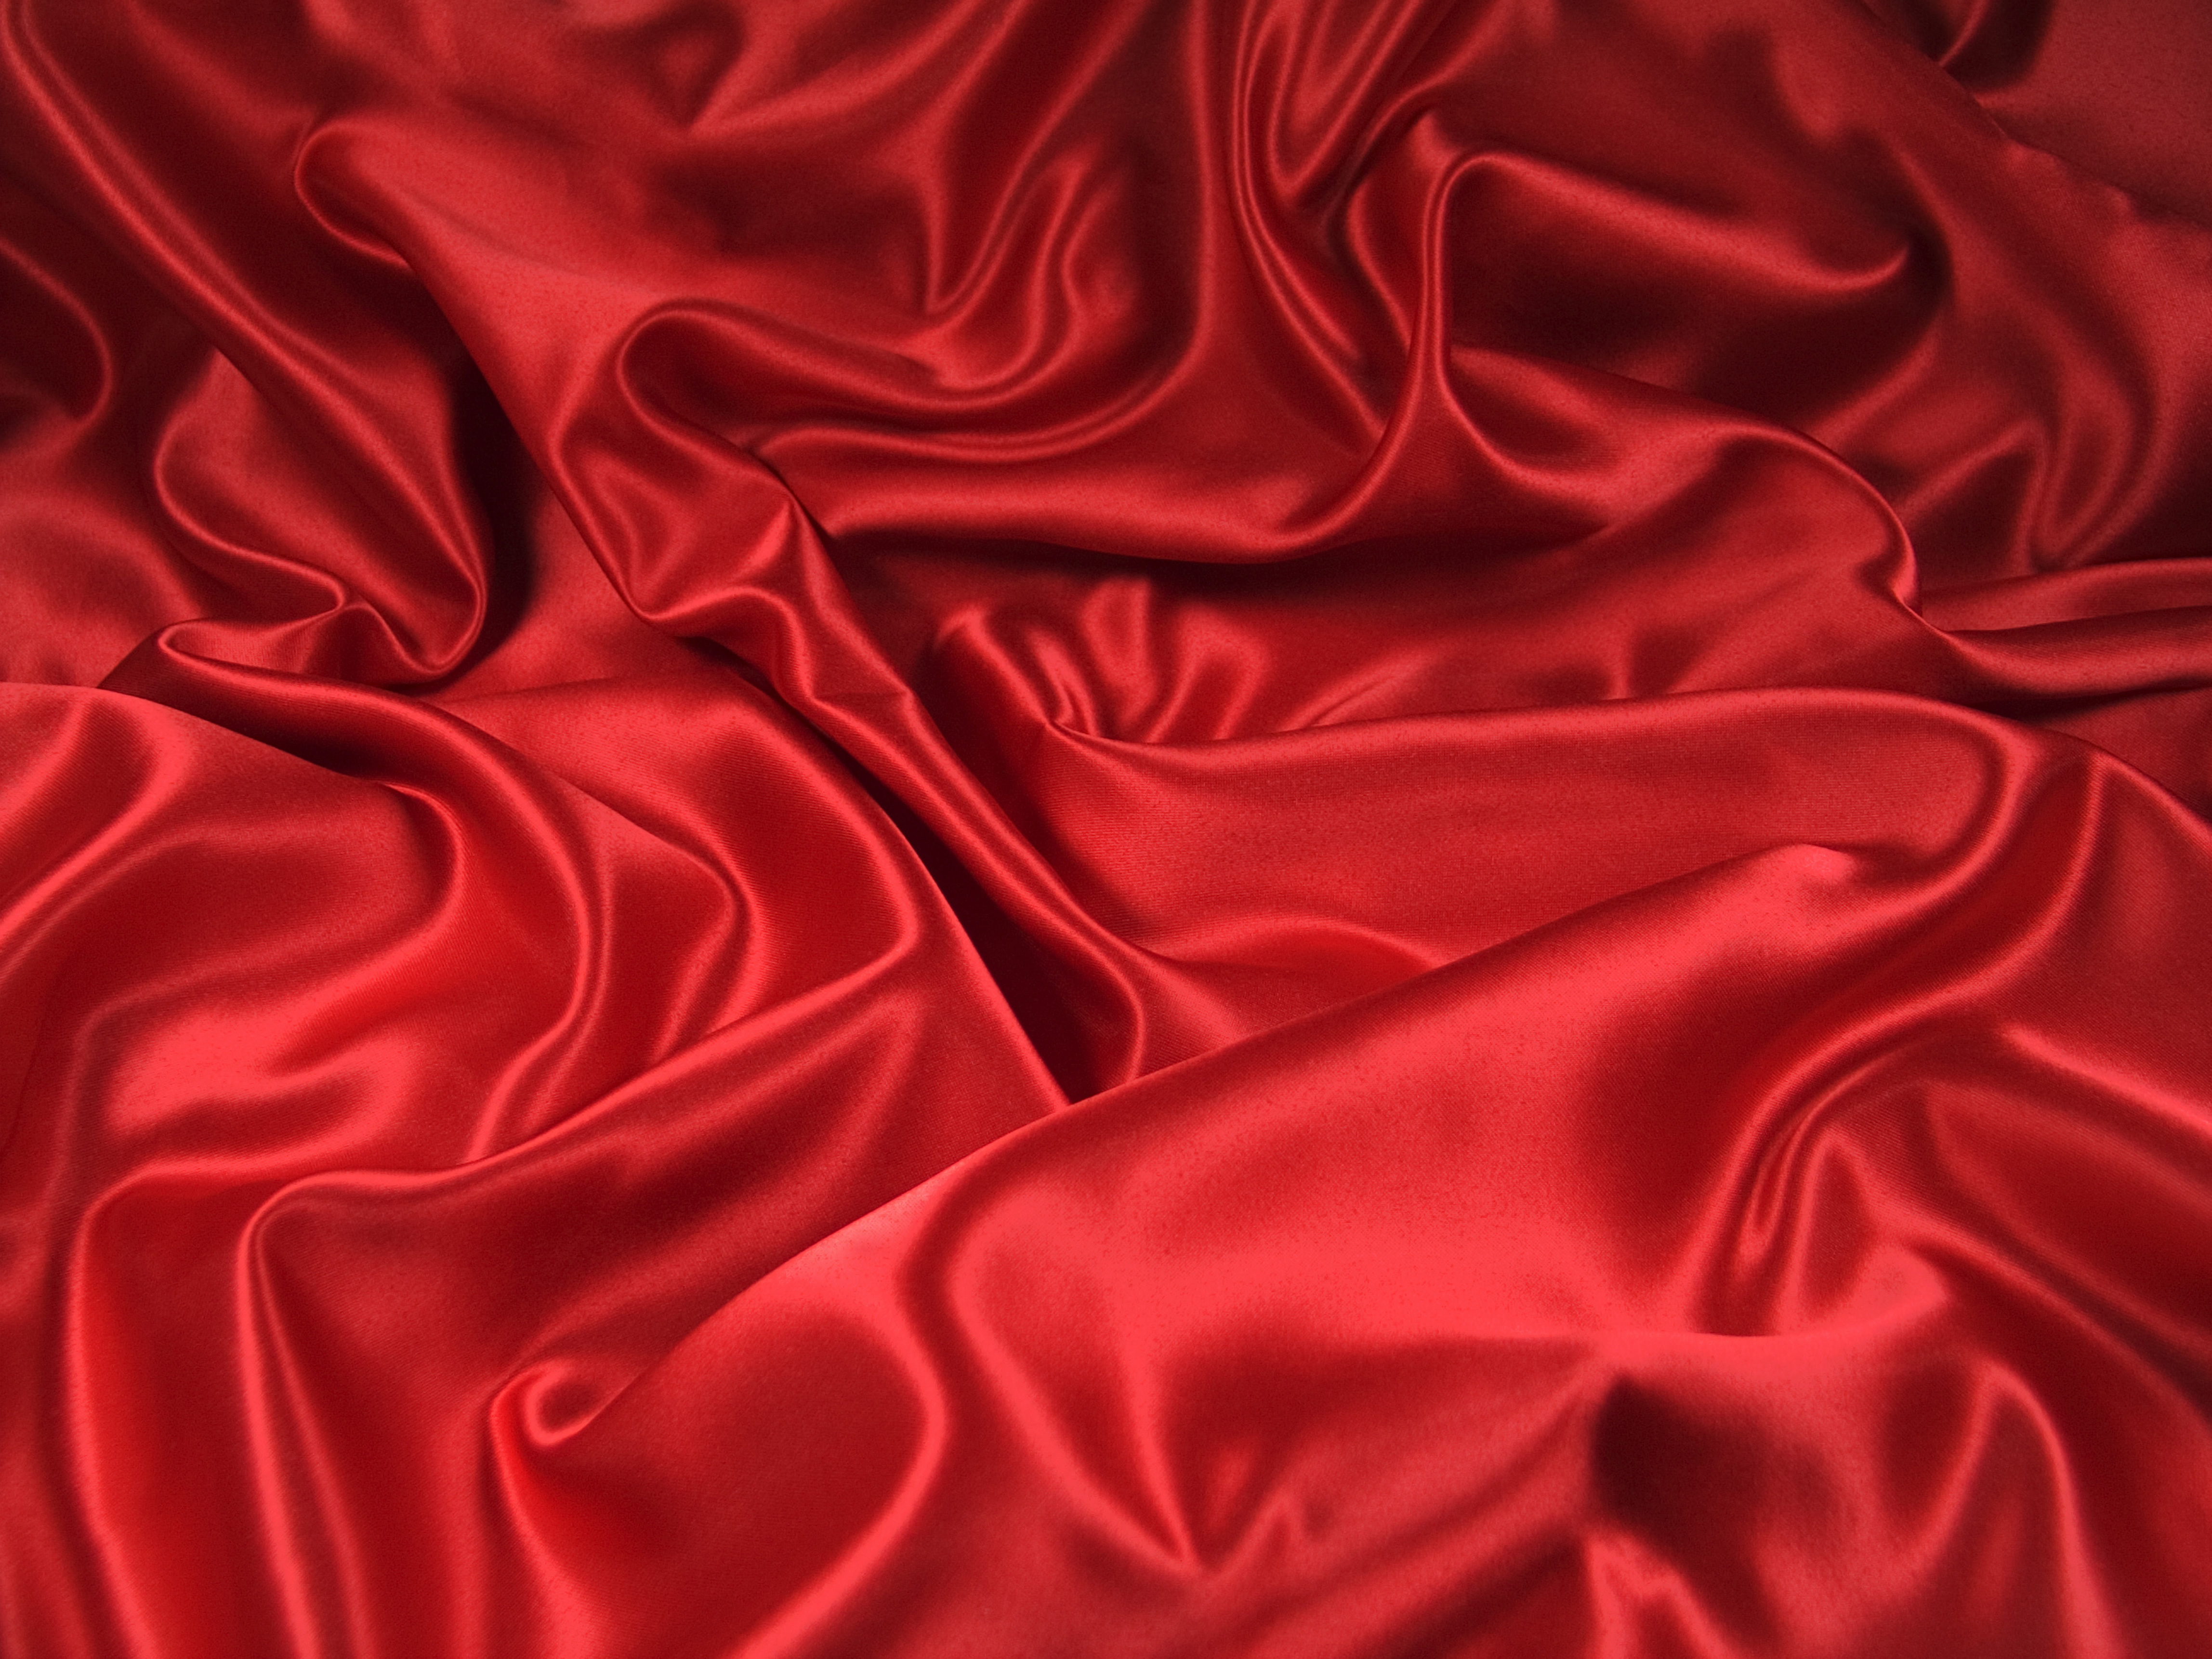 red fabric cloth, silk, download photo, background, texture, red satin texture background